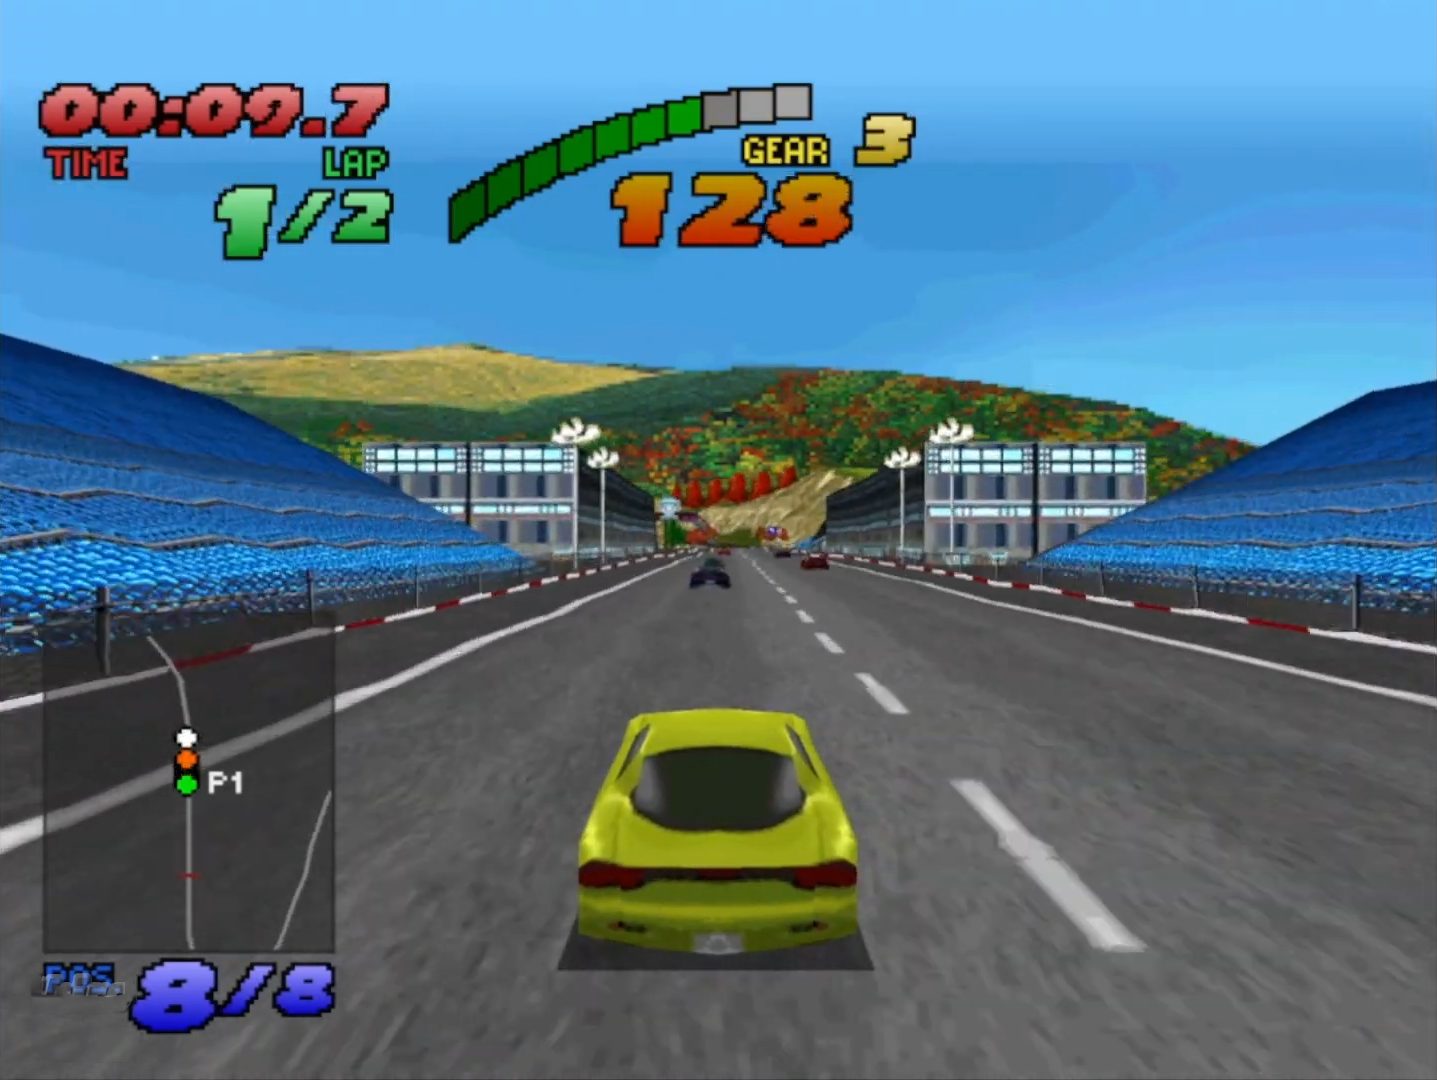 Need for Speed - Road Challenge (Europe) (En,Sv) ROM (ISO